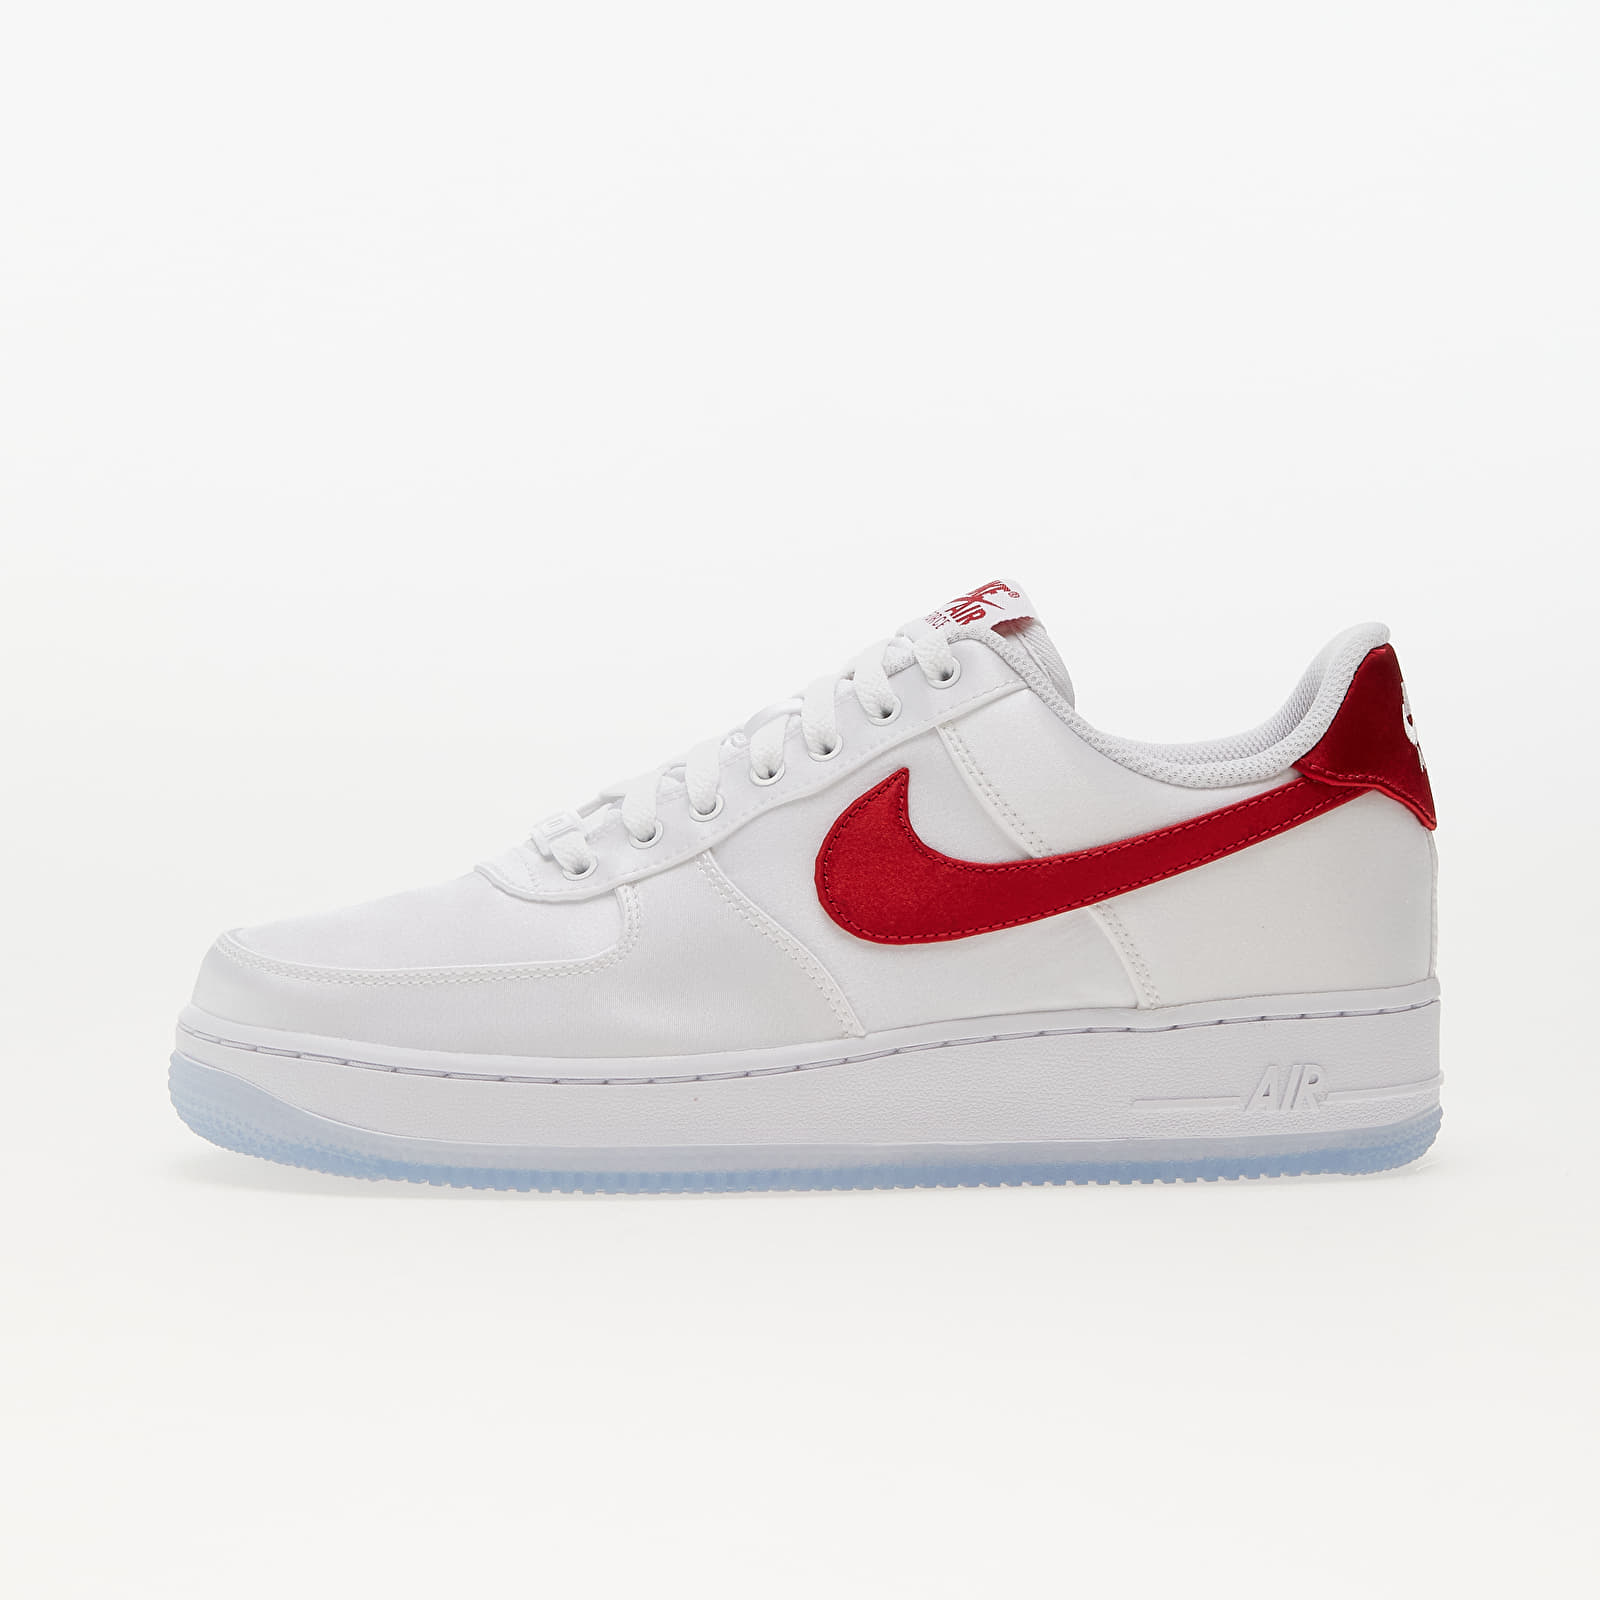 Women's sneakers and shoes Nike W Air Force 1 '07 Essential Snkr White/ Varsity Red